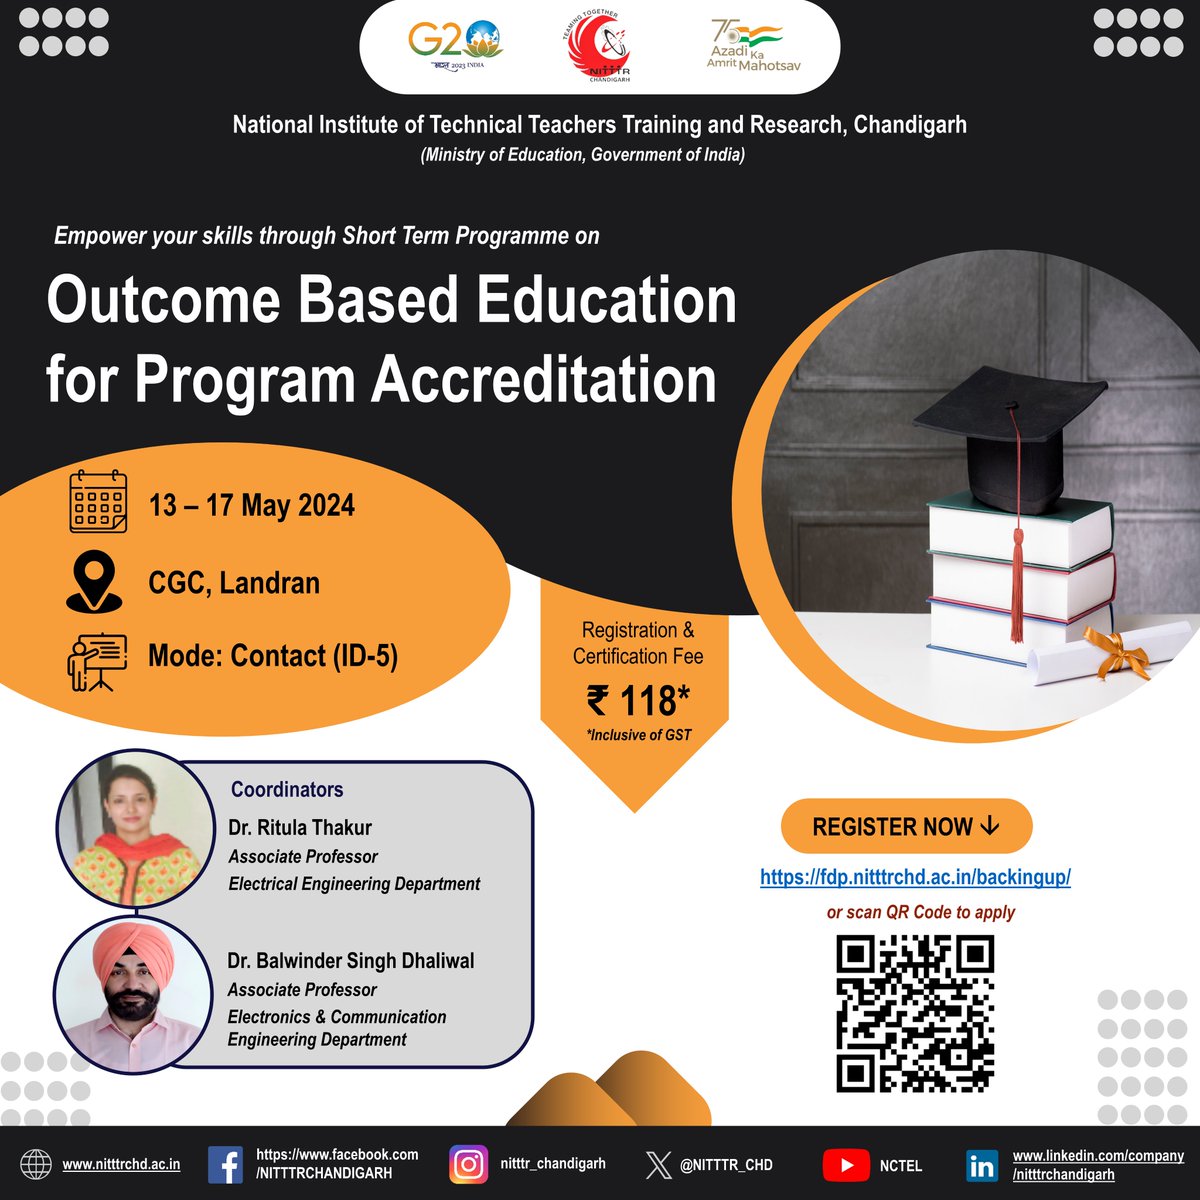 Join us for a 1 Week course on Outcome Based Education for Program Accreditation organized by the EE Dept from 13-17 May'24.Interested faculty & staff members may apply at fdp.nitttrchd.ac.in/backingup/ #nitttrchd #OutcomeBasedEducation #ProgramAccreditation #AccreditationStandards #OBE